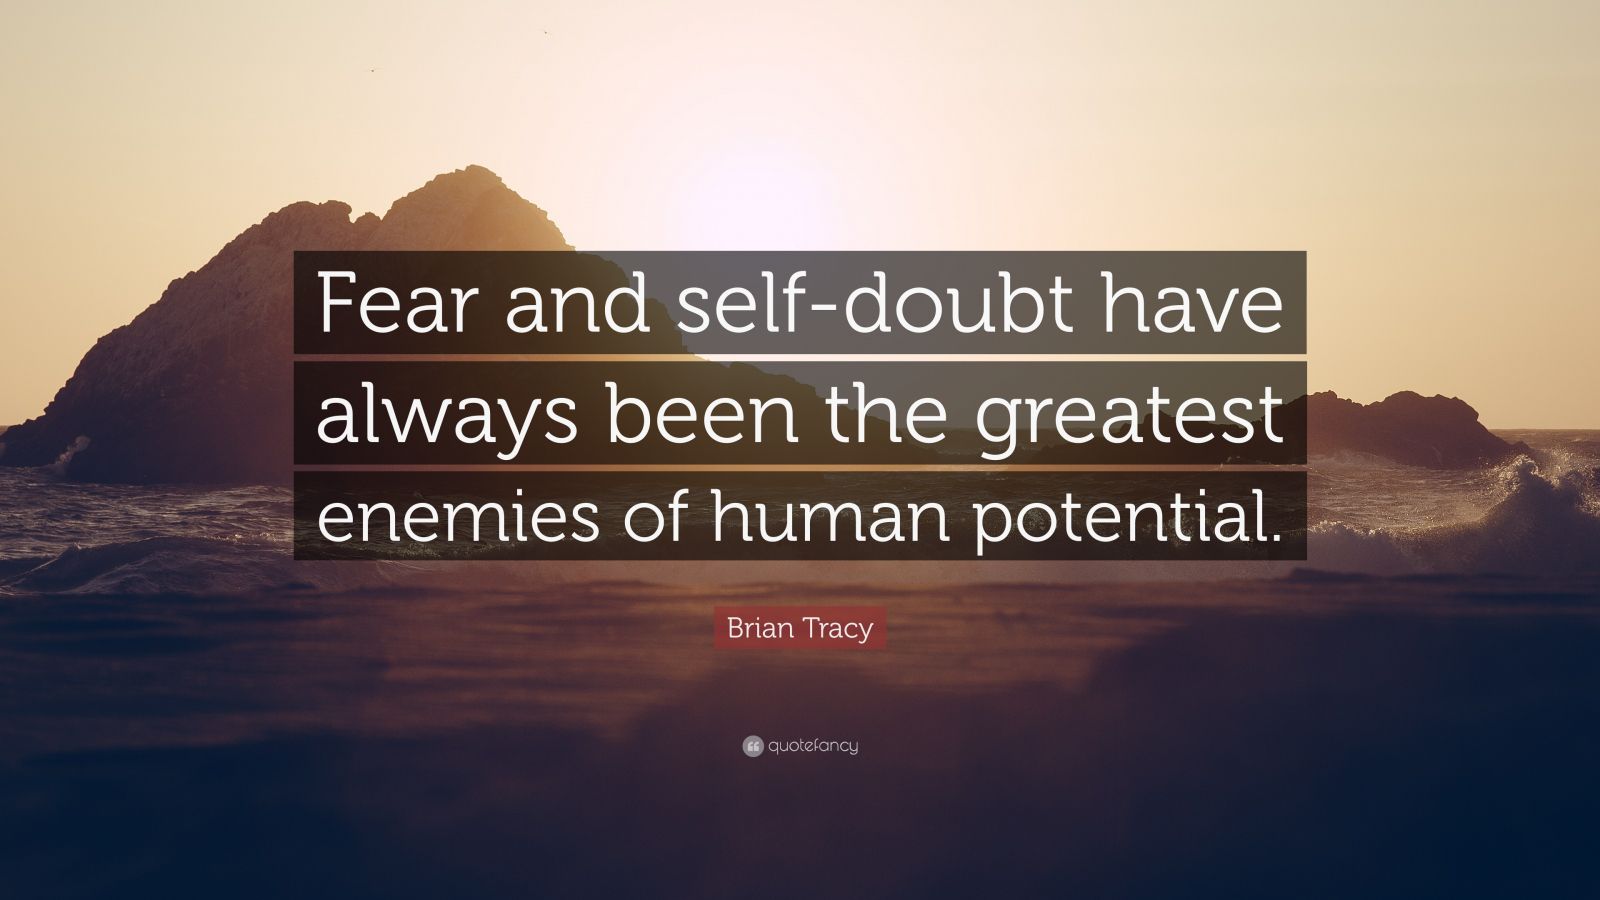 Brian Tracy Quote: “Fear and self-doubt have always been the greatest